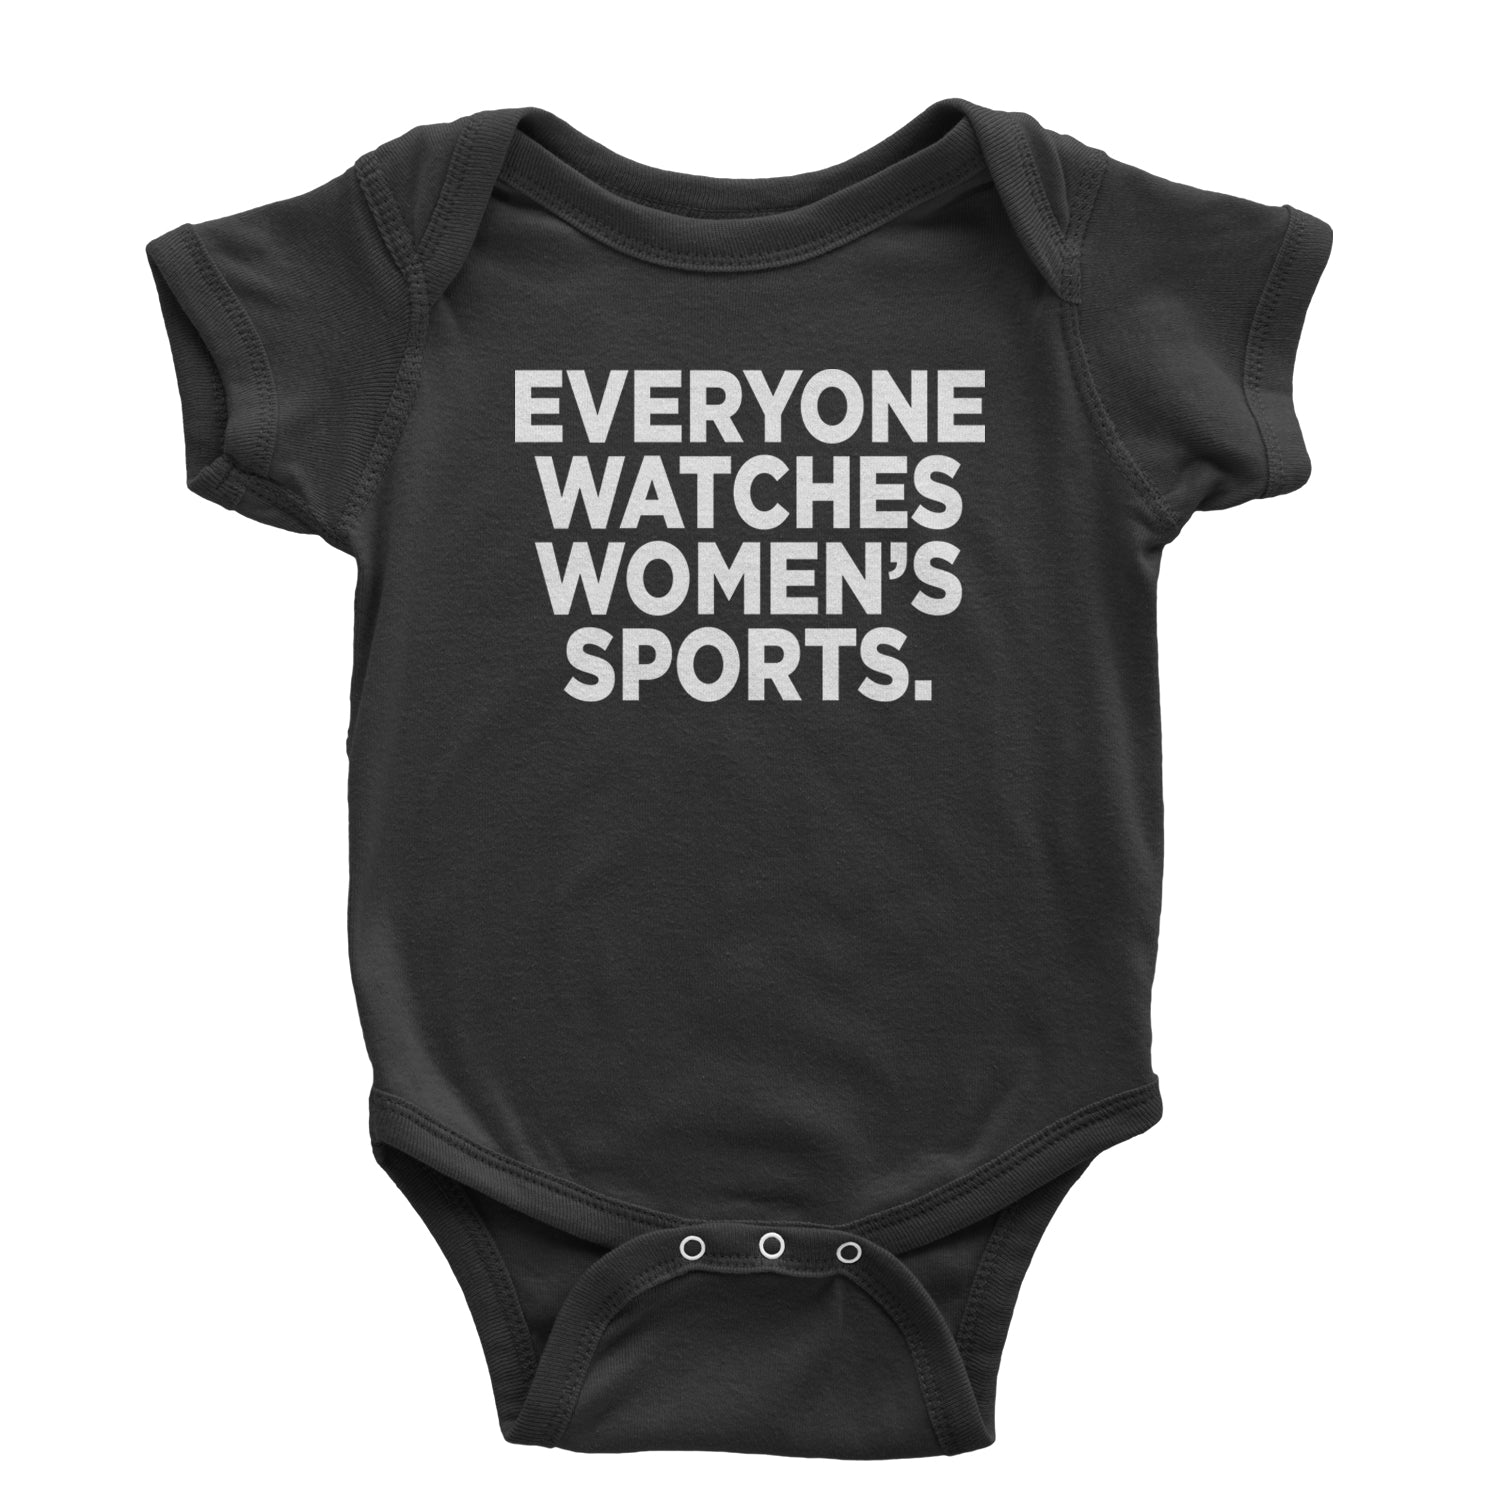 Everyone Watches Women's Sports Infant One-Piece Romper Bodysuit and Toddler T-shirt